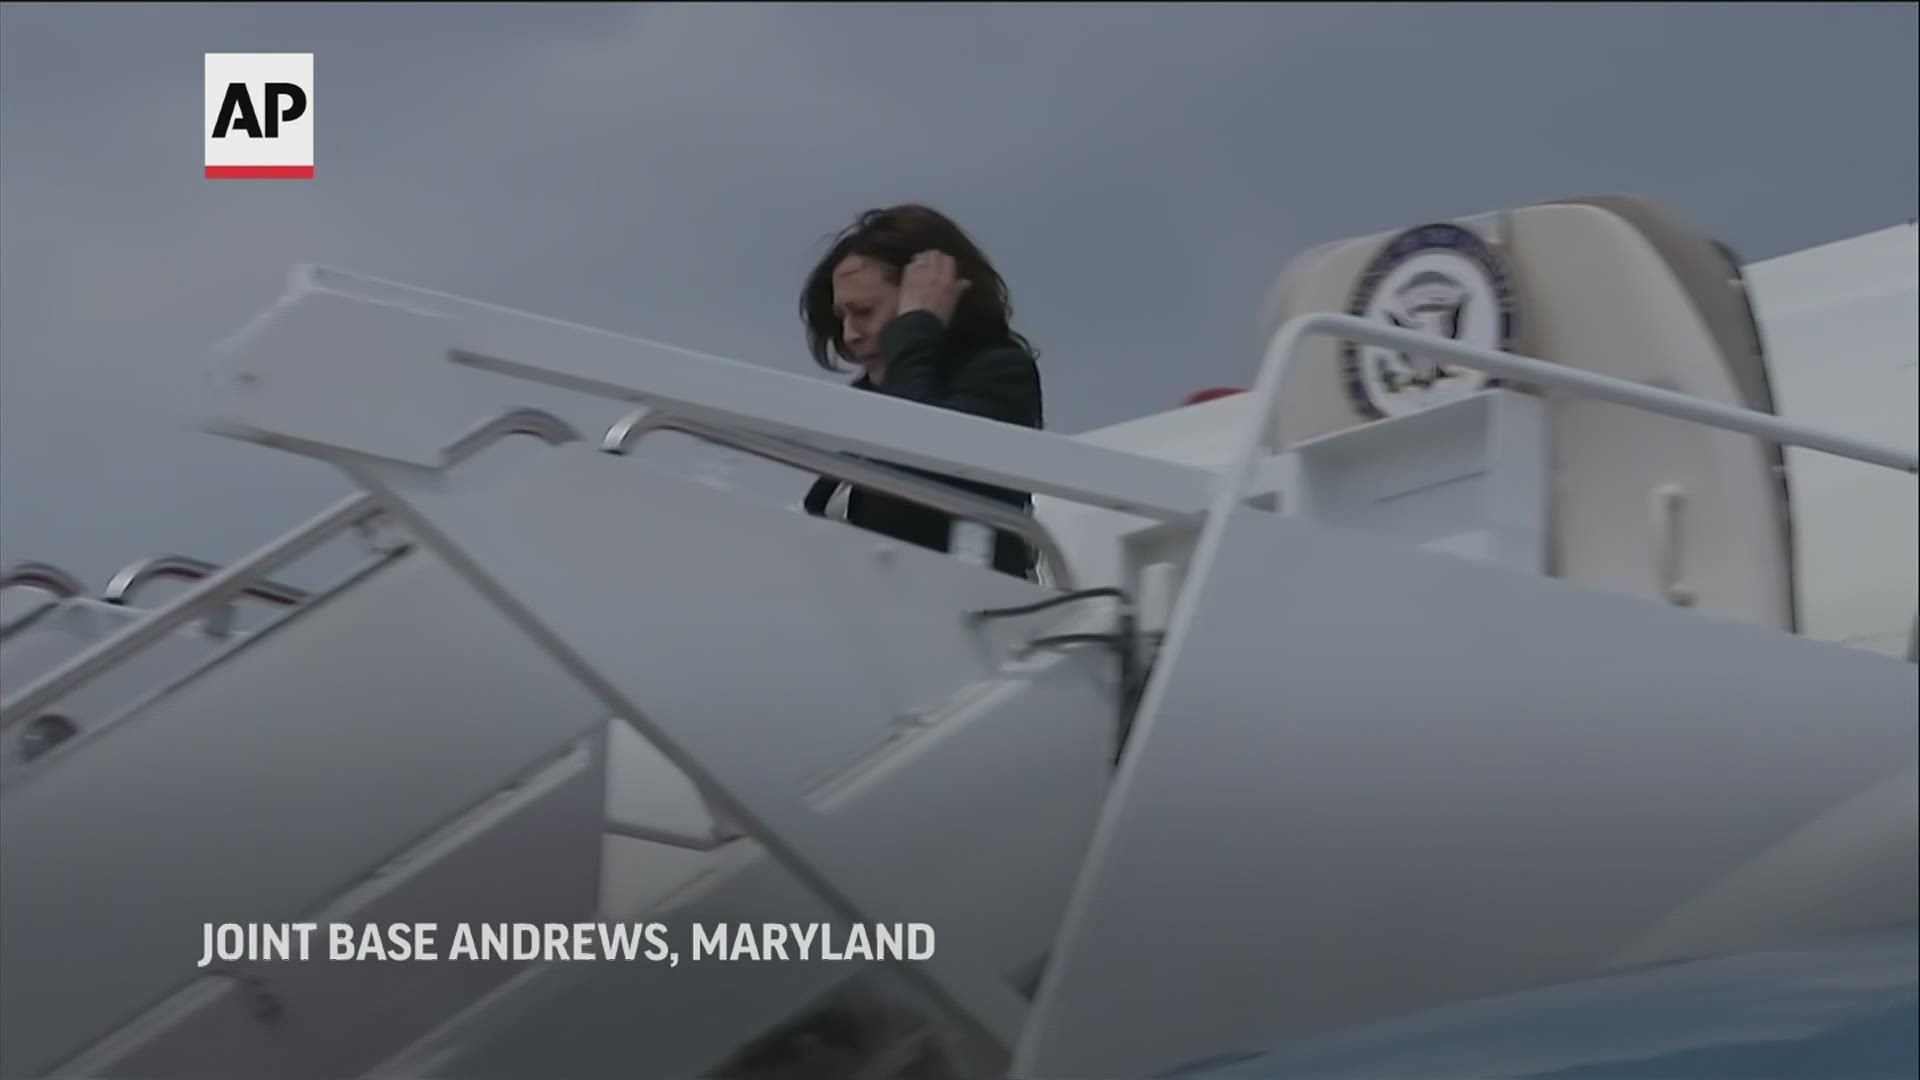 A technical issue forced Vice President Kamala Harris' plane to return to Joint Base Andrews in Maryland about 30 minutes after she had left on a trip Sunday.